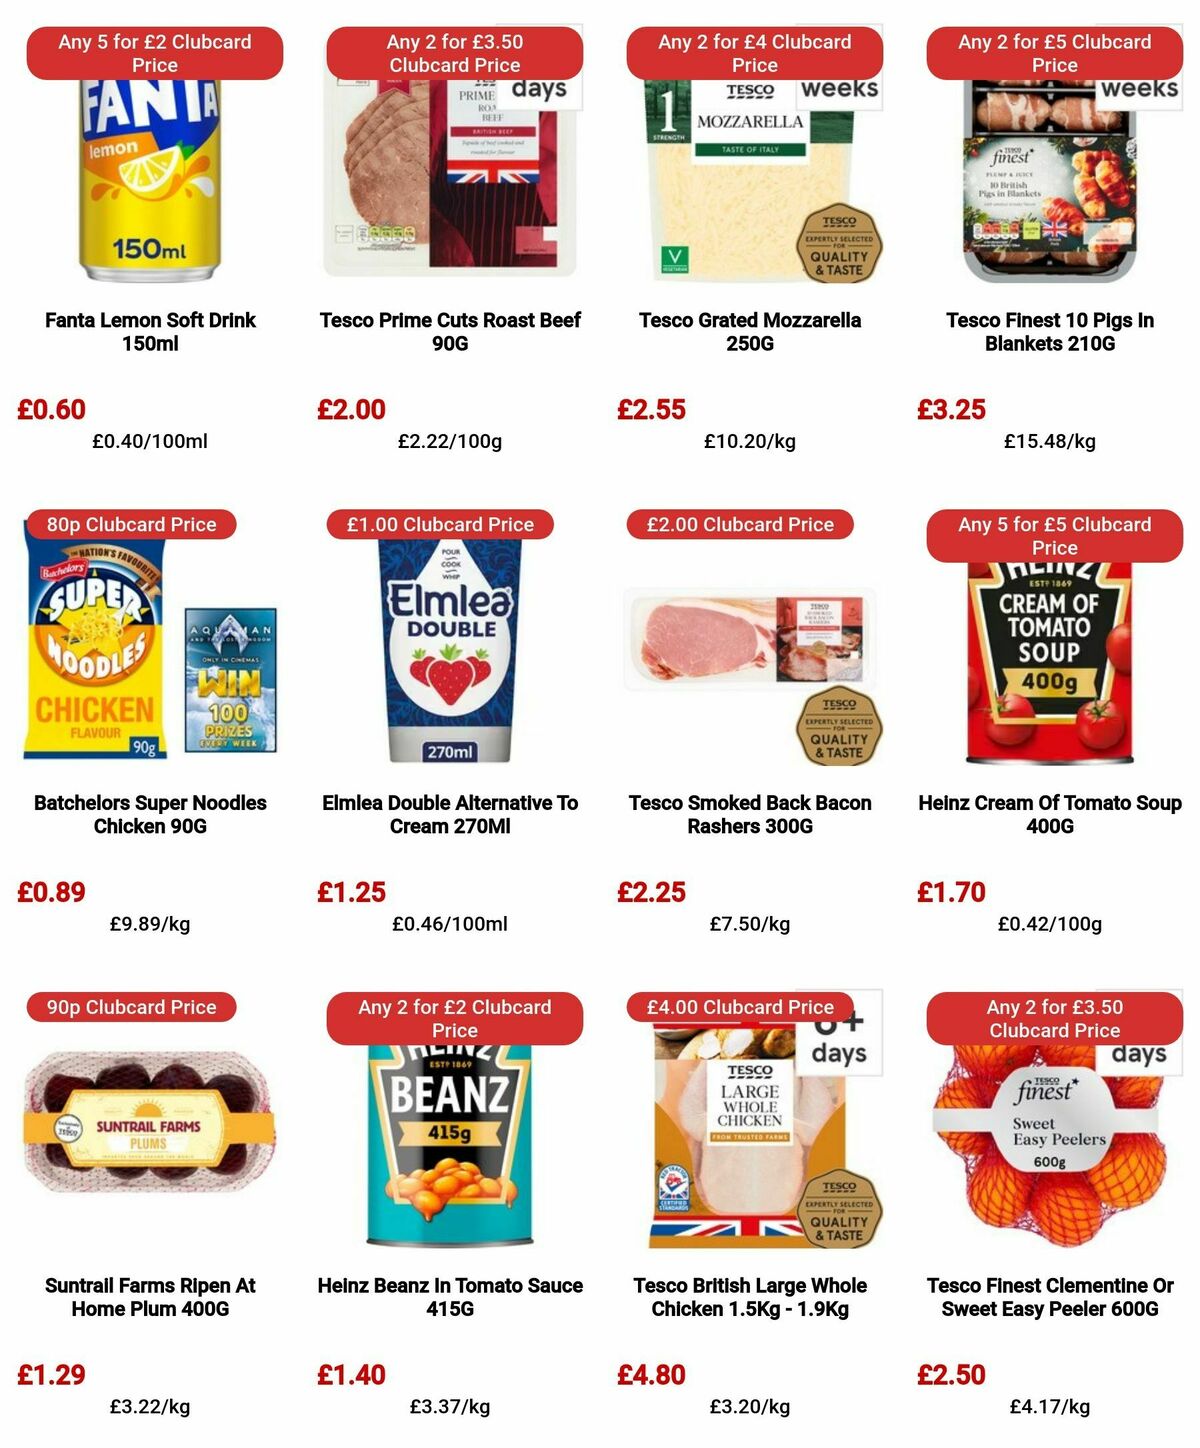 TESCO Offers from 11 April